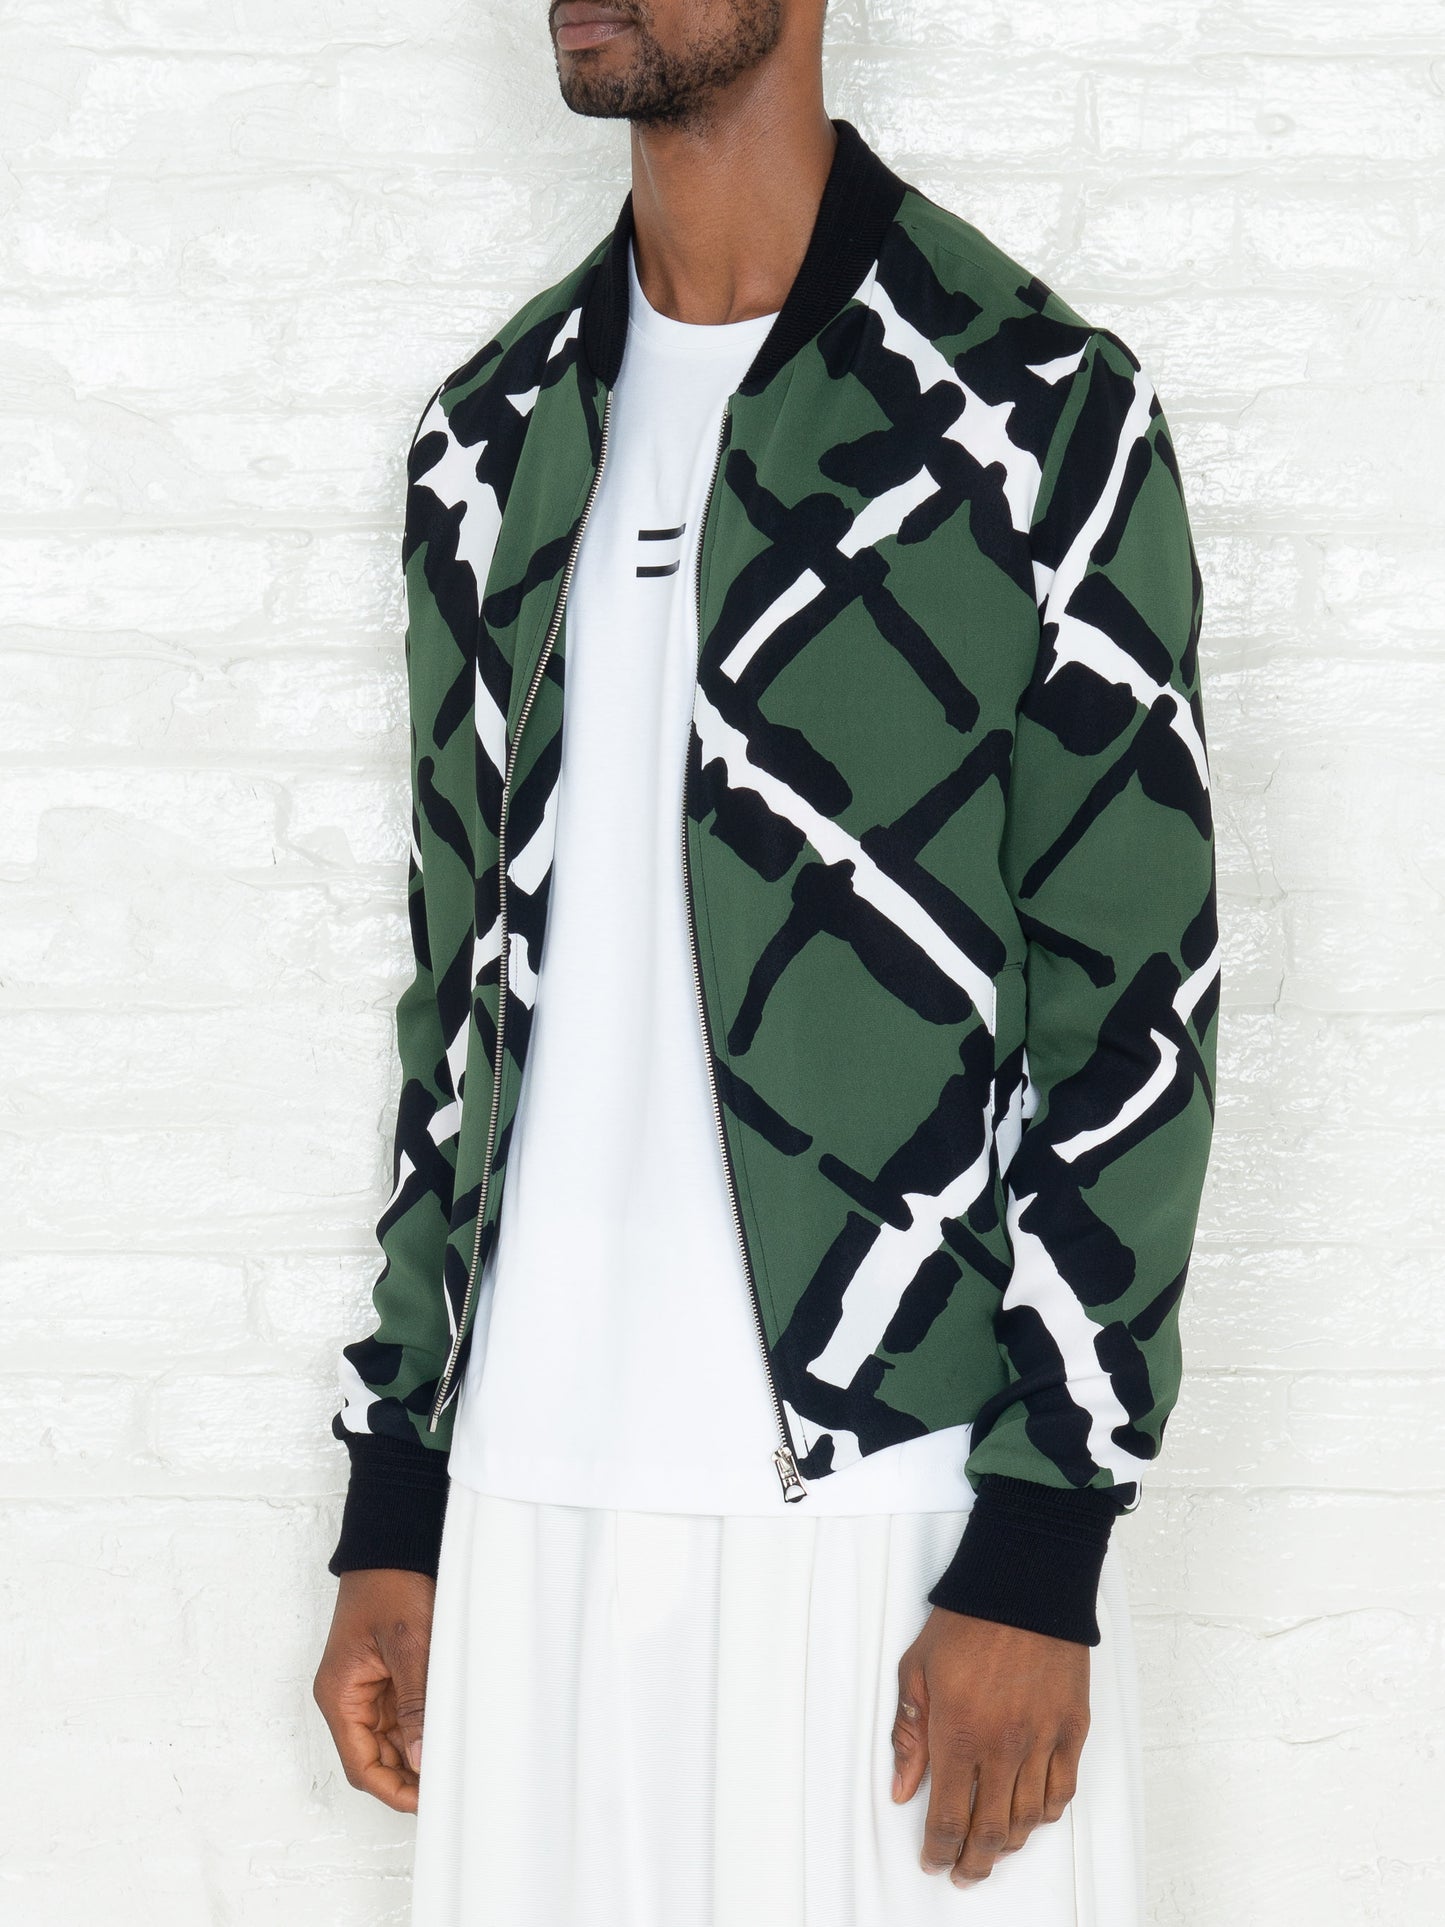 "The Classic Bomber" in Military Print